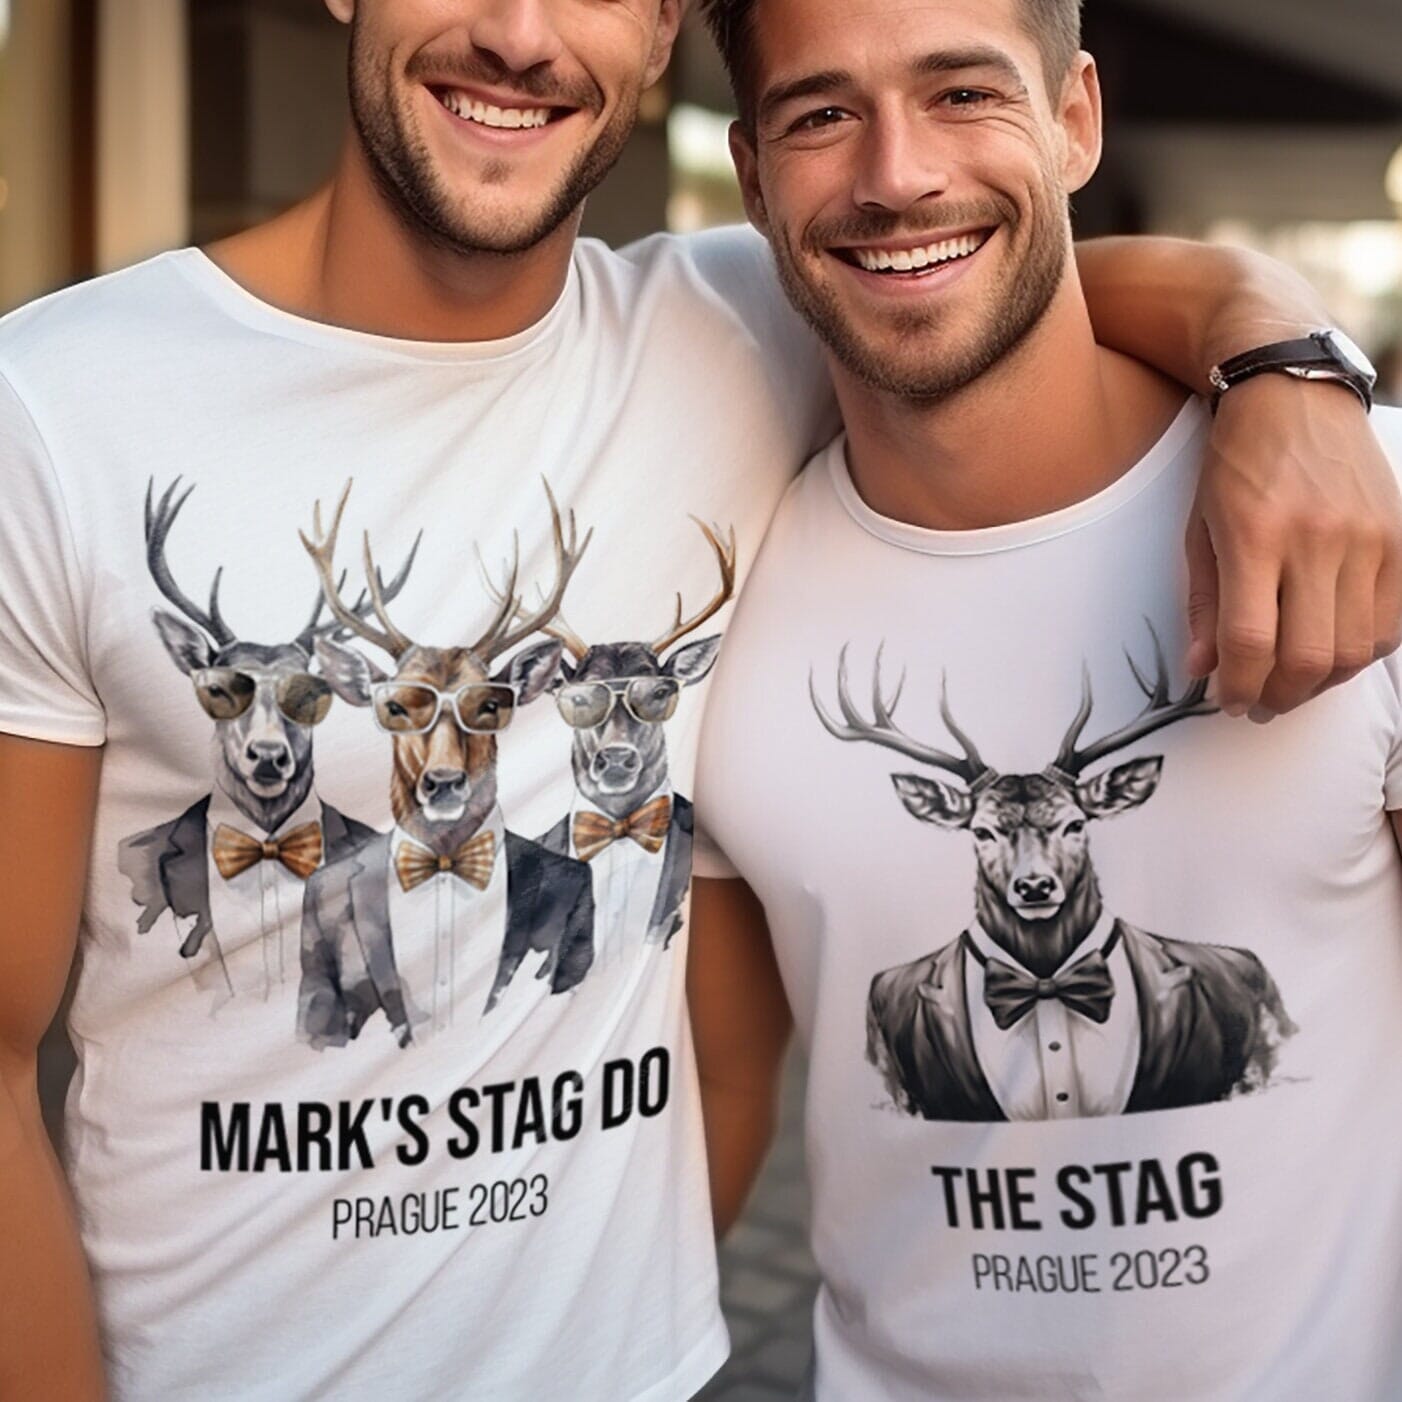 The Stag And Stag's Team T-Shirt, Groom Groomsman Gift Funny Men's Stag Night Tee Stag Do Honeymoon